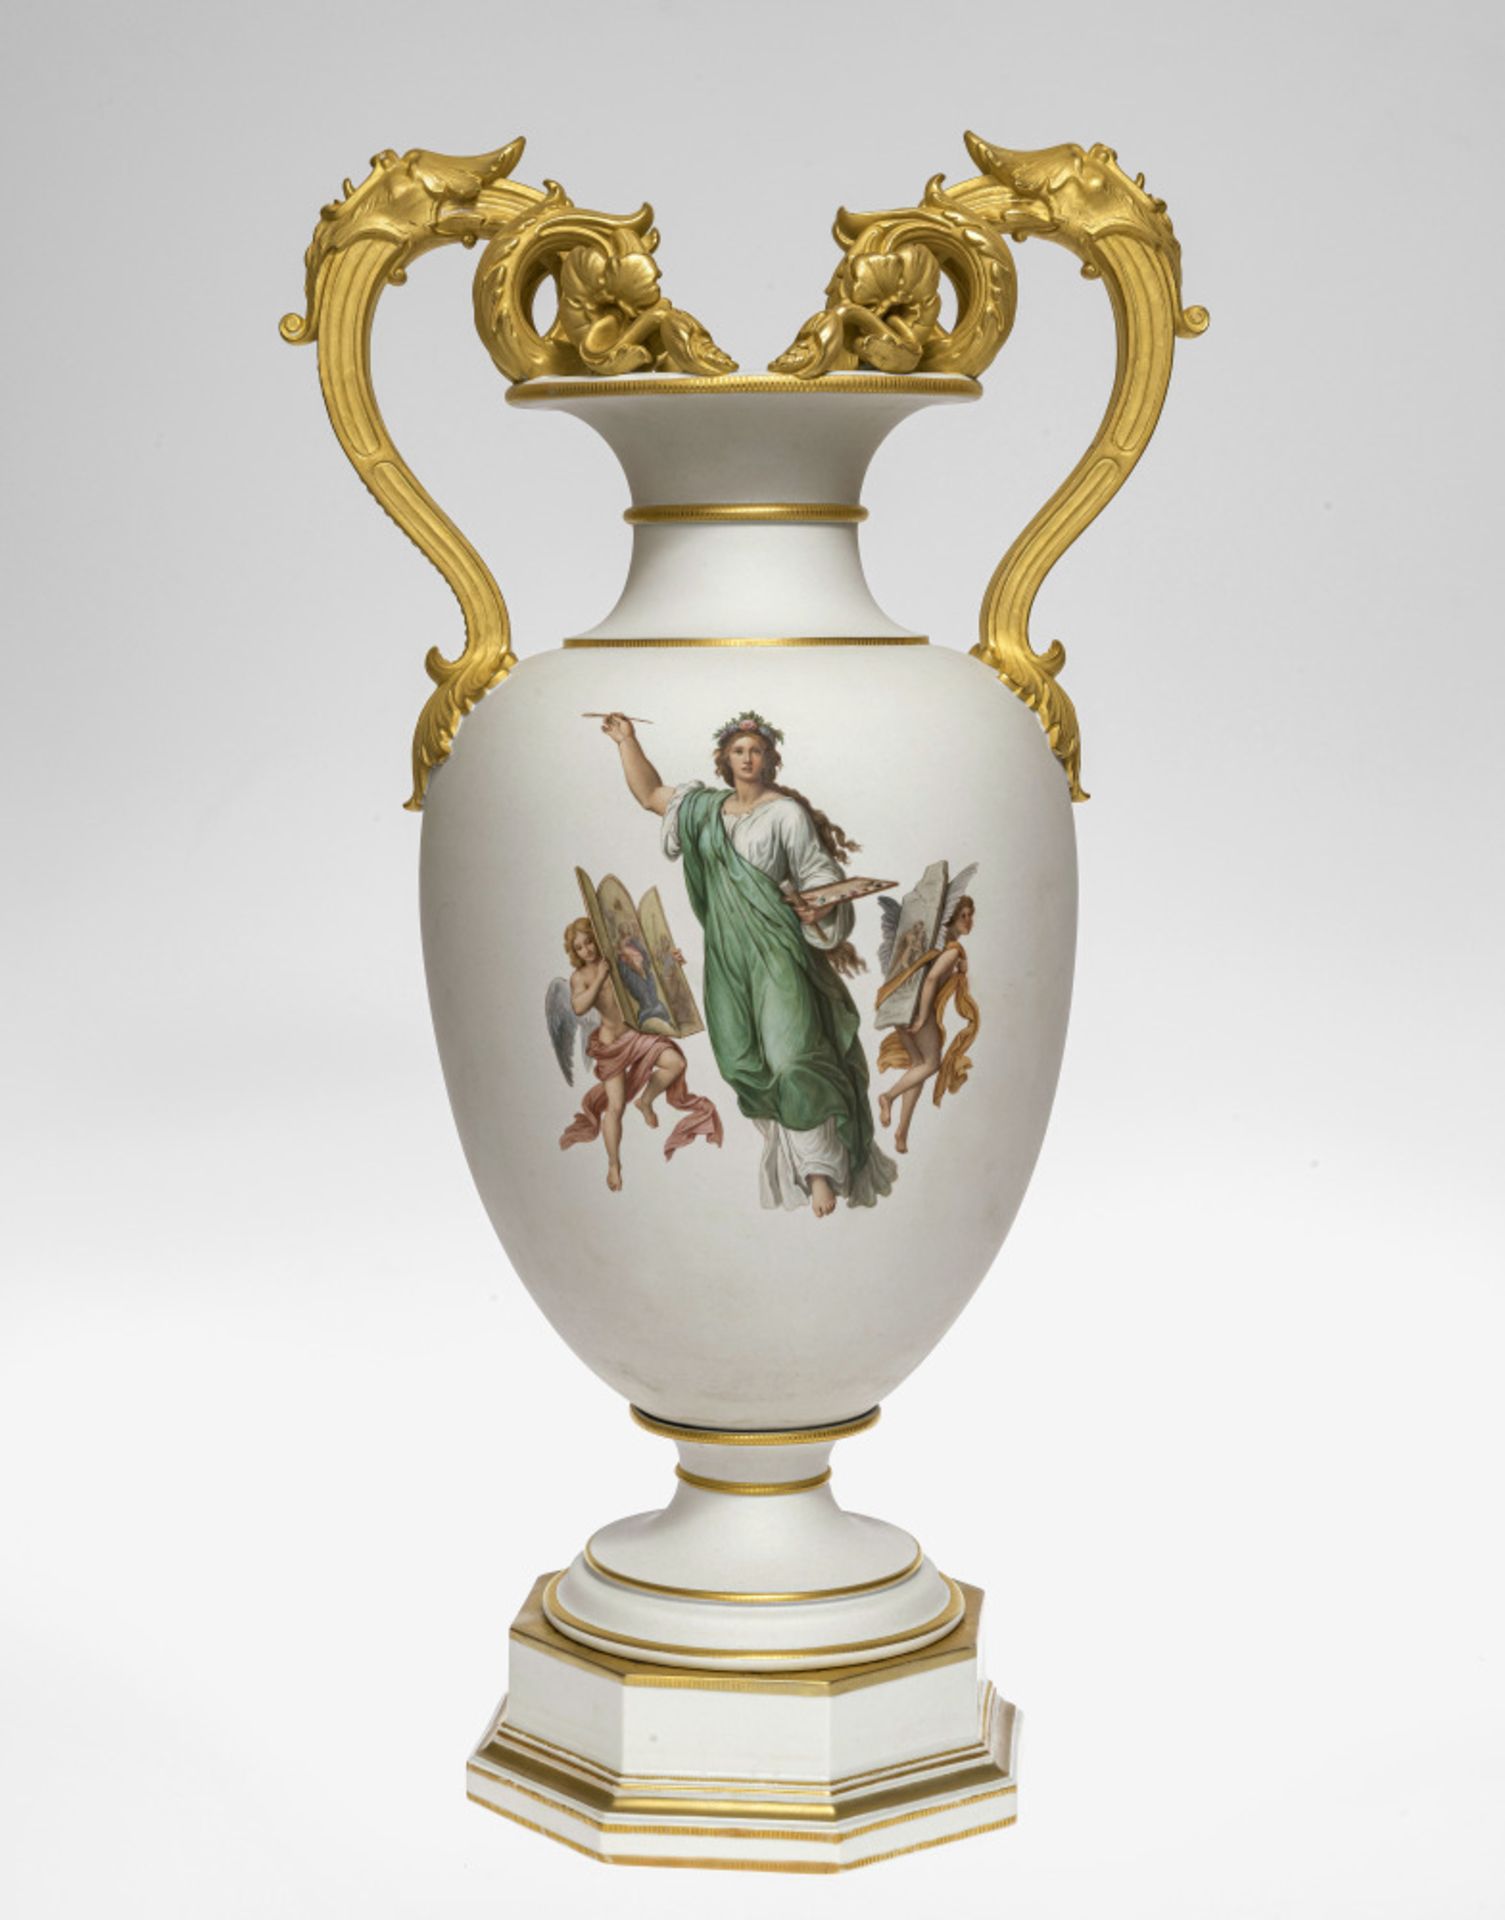 A magnificent vase with the allegory of painting - KPM Berlin, circa 1860, model by Julius W. Mantel